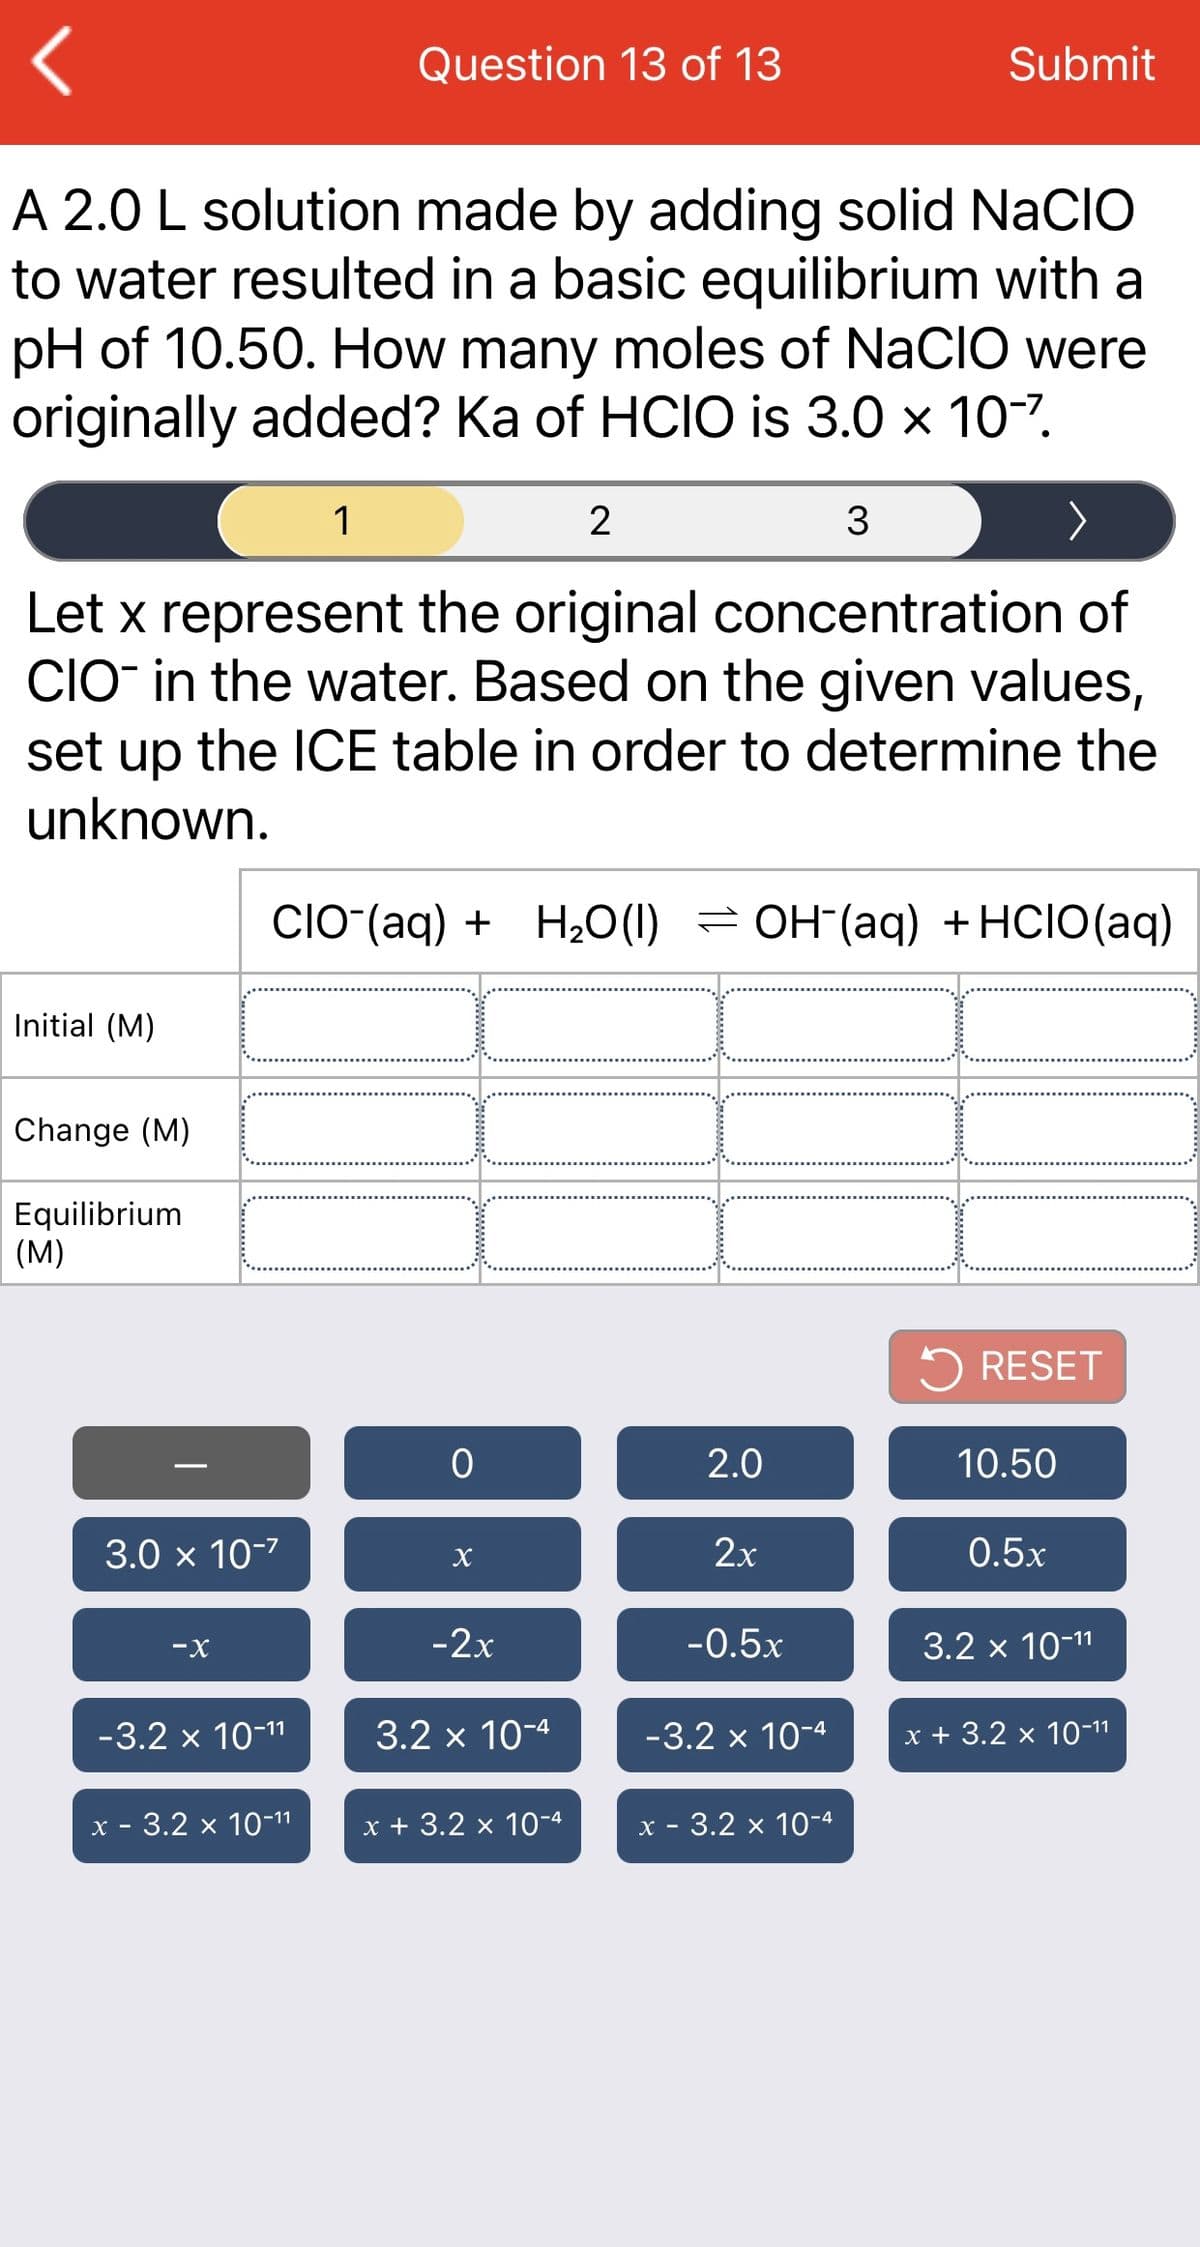 Question 13 of 13
Submit
A 2.0 L solution made by adding solid NaCIO
to water resulted in a basic equilibrium with a
pH of 10.50. How many moles of NaCIO were
originally added? Ka of HCIO is 3.0 x 10-7.
1
2
Let x represent the original concentration of
CIO in the water. Based on the given values,
set up the ICE table in order to determine the
unknown.
CIO-(aq) + H20(1) = OH (aq) +HCIO(aq)
Initial (M)
Change (M)
Equilibrium
(M)
5 RESET
2.0
10.50
3.0 x 10-7
2х
0.5x
-X
-2x
-0.5x
3.2 x 10-11
-3.2 x 10-11
3.2 x 10-4
-3.2 x 10-4
x + 3.2 x 10-11
х - 3.2 х 10-11
x + 3.2 x 10-4
х - 3.2 х 10-4
